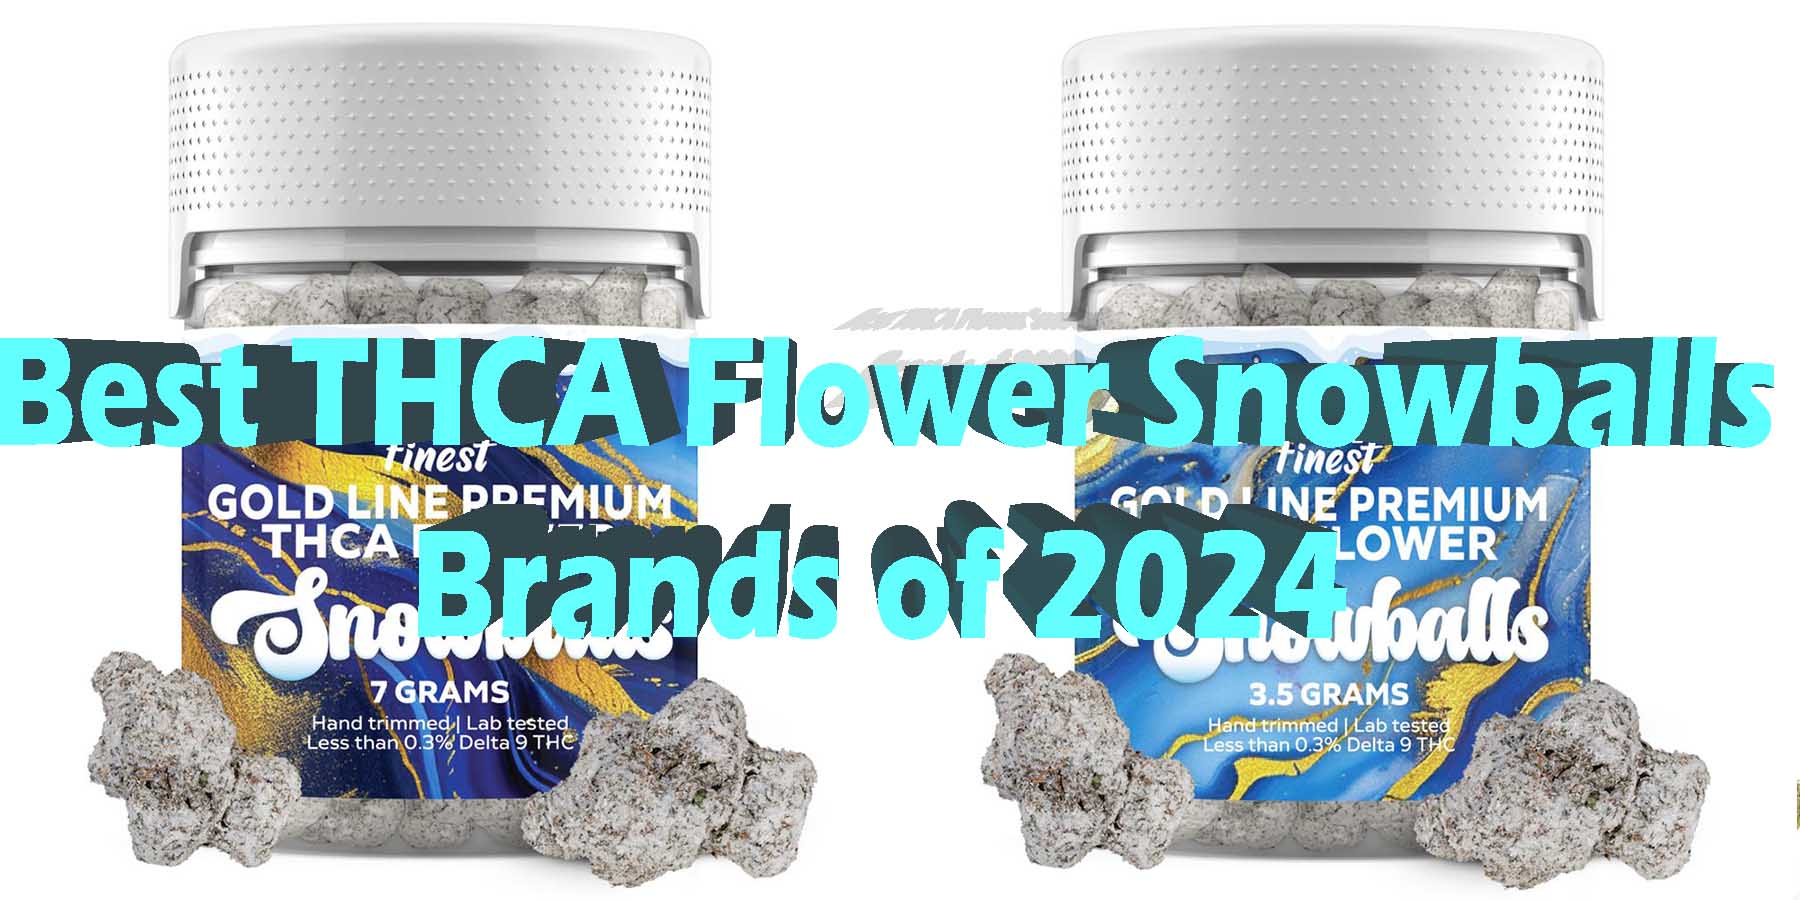 Best THCA Flower Snowballs Brands of 2024 How to Take Them Safely LowestPrice Coupon Discount For Smoking Best High Smoke Shop Online Near Me Bloomz.